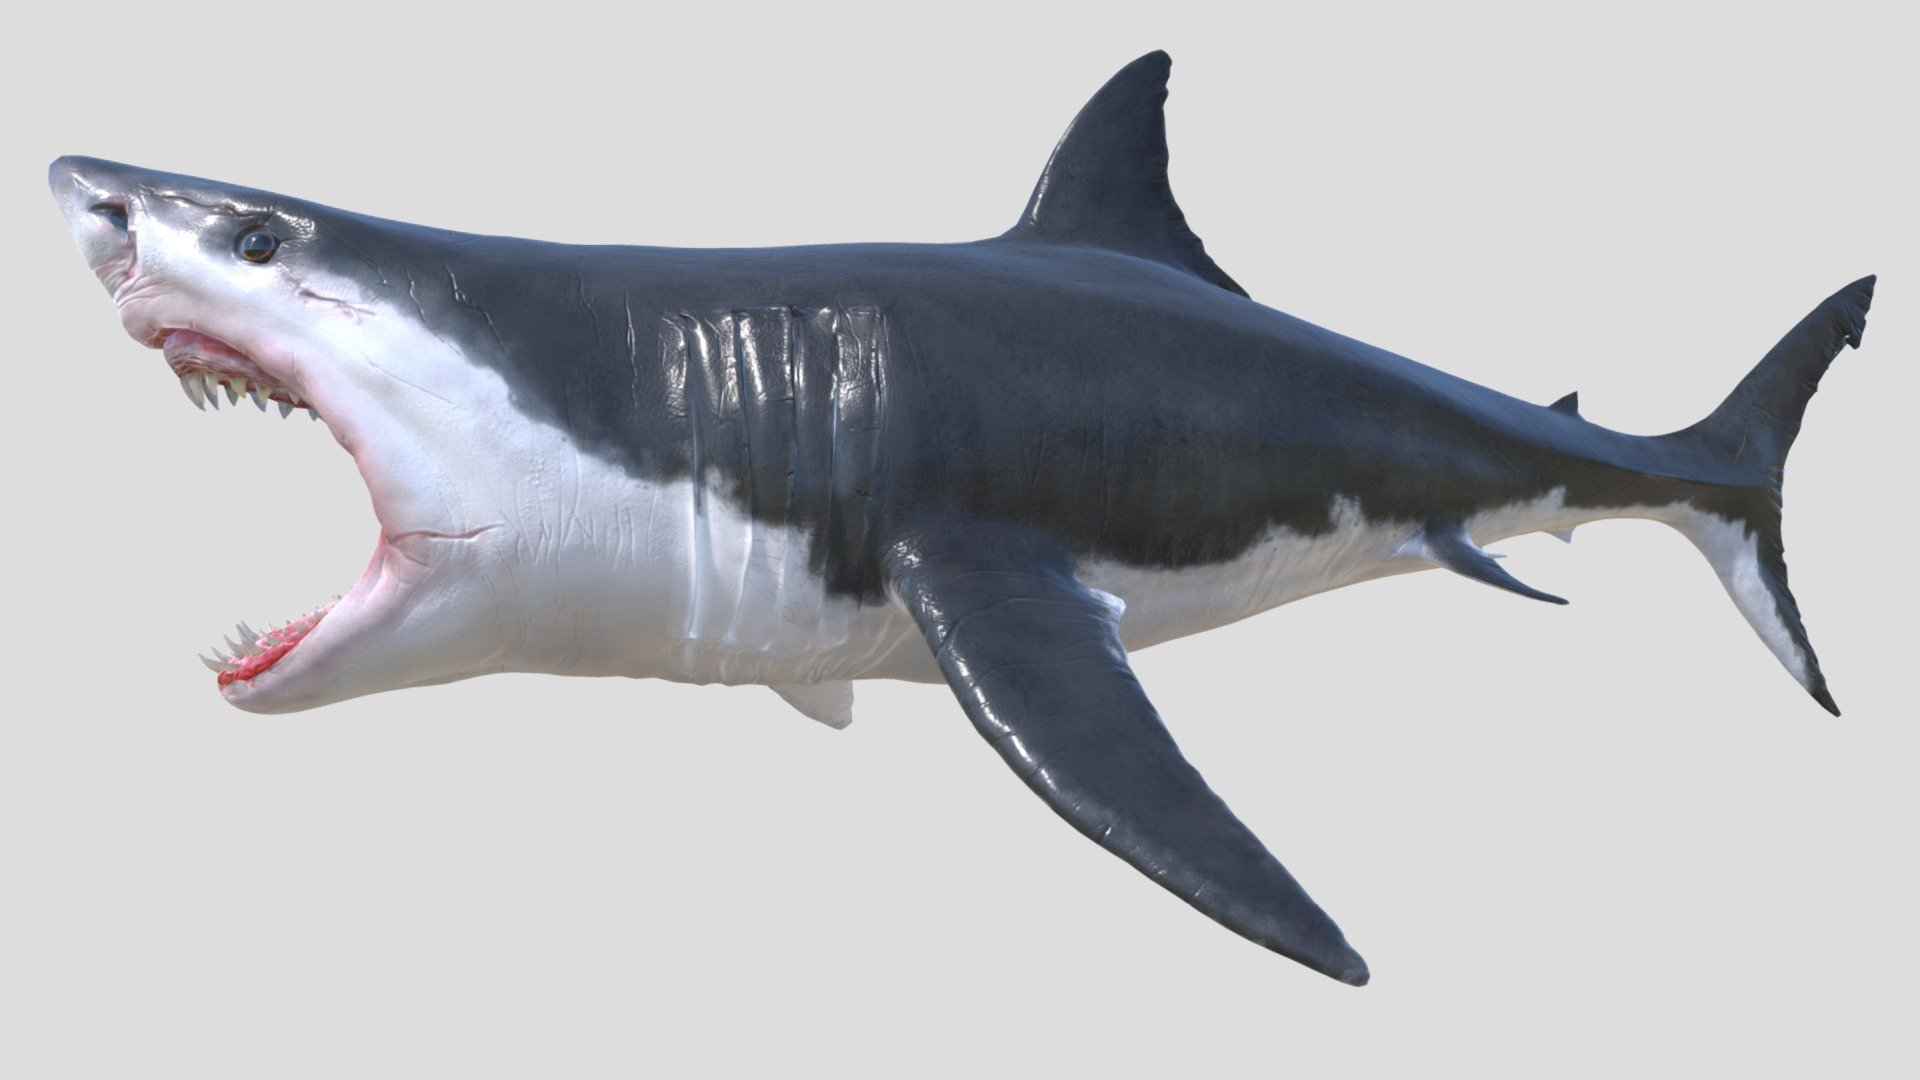 White Shark Realistic model in size and natural scales, easy to change

This model is suitable for use in broadcast, high-res film close-up, advertising, design visualization, forensic presentation, low poly models, intended for game/realtime/background use, etc
The model is accurate with the real world size and scale
Model in neutral pose Shark file options with mouth closed Shark file options with mouth open

Model sculpt in Zbrush 2021 Exported to Cinema 4D

High detail realistic White Shark model without rig, Shark model has clean topology, Shark model fully ready to rigging.

Arquive : FBX

Texture 8192 x 8192 4096 x 4096

Easy to Adjust

Does not contain lighting

I hope it will be useful in your project !

Thank you for visiting my models !! - White Shark - Buy Royalty Free 3D model by aleexstudios 3d model